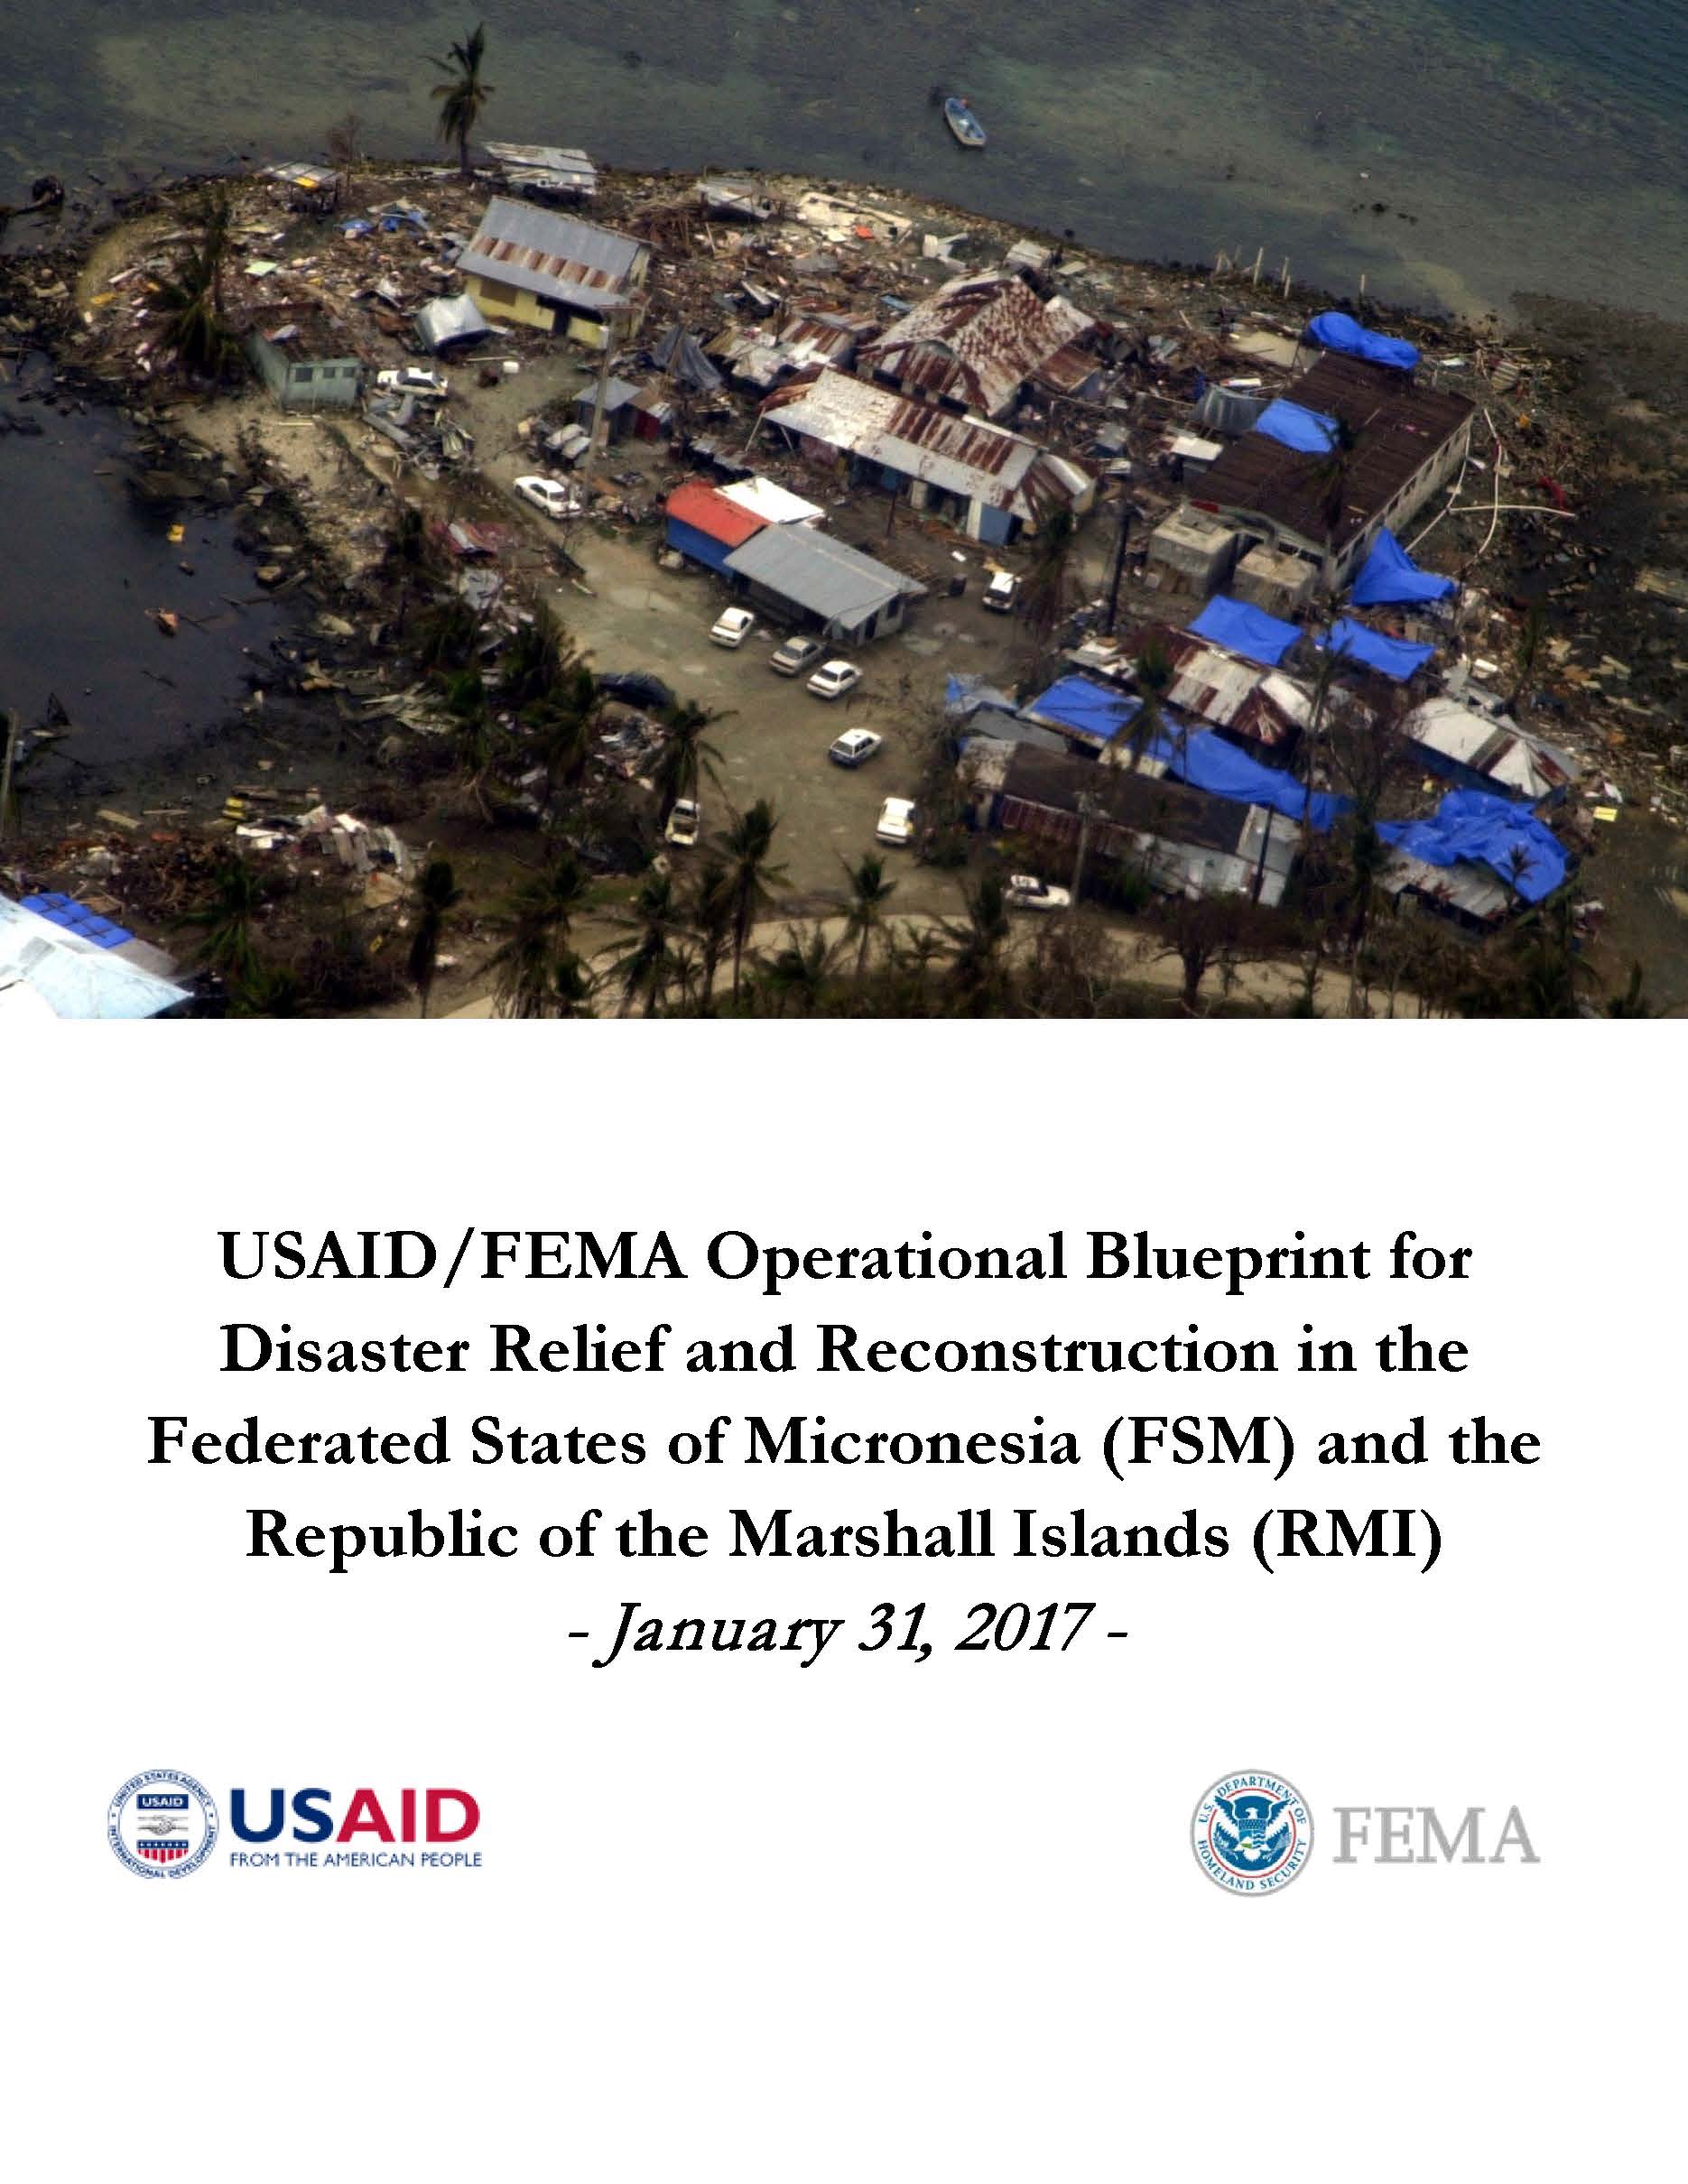 USAID/FEMA Operational Blueprint for Disaster Relief and Reconstruction in FSM and RMI